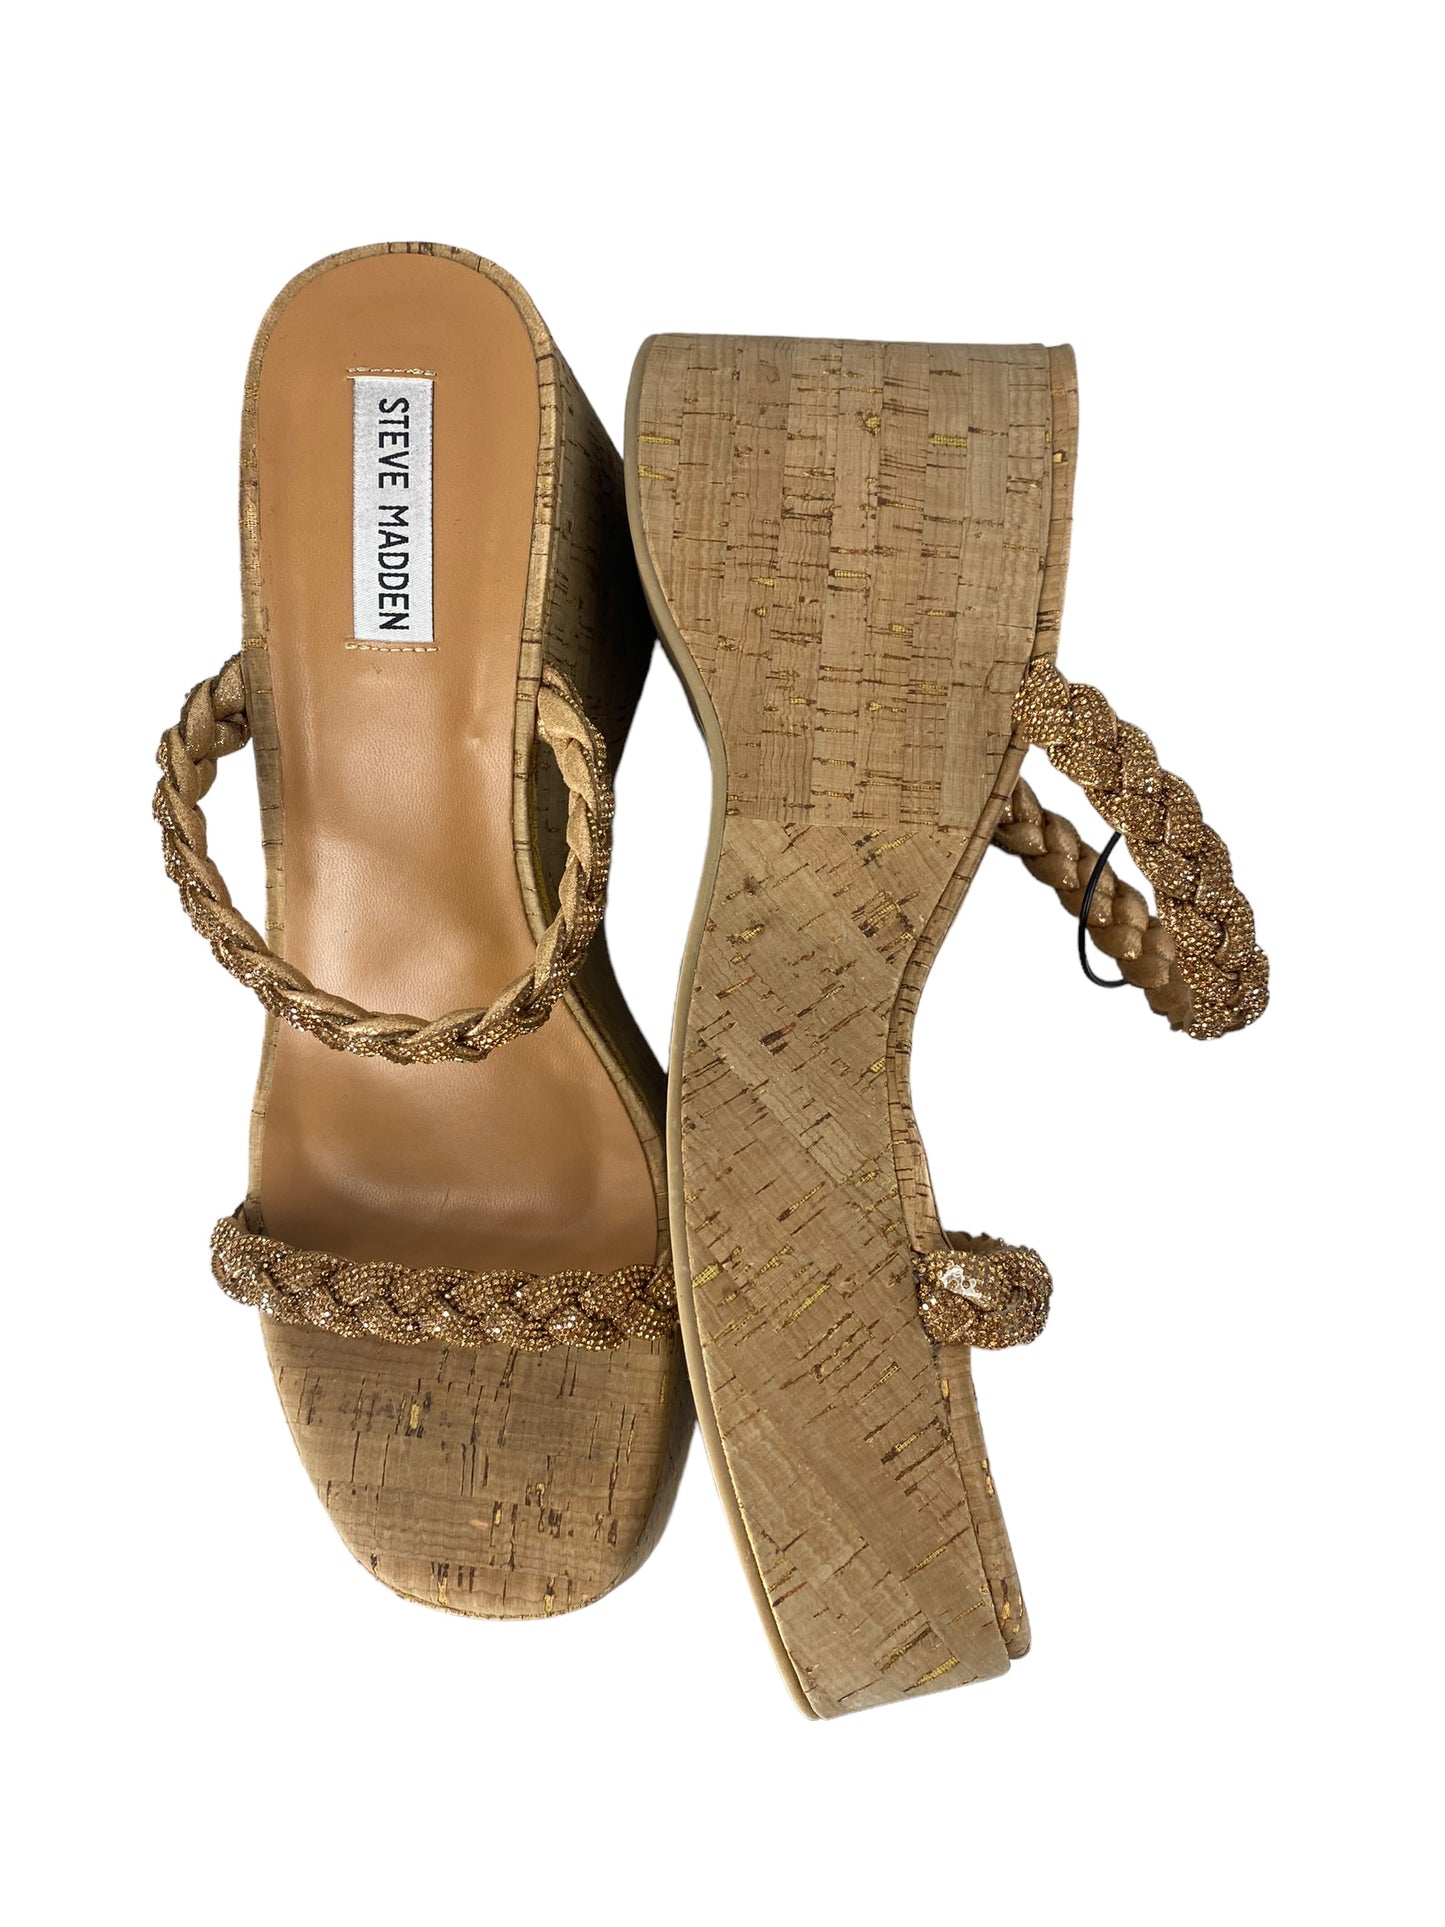 Shoes Heels Espadrille Wedge By Steve Madden  Size: 11